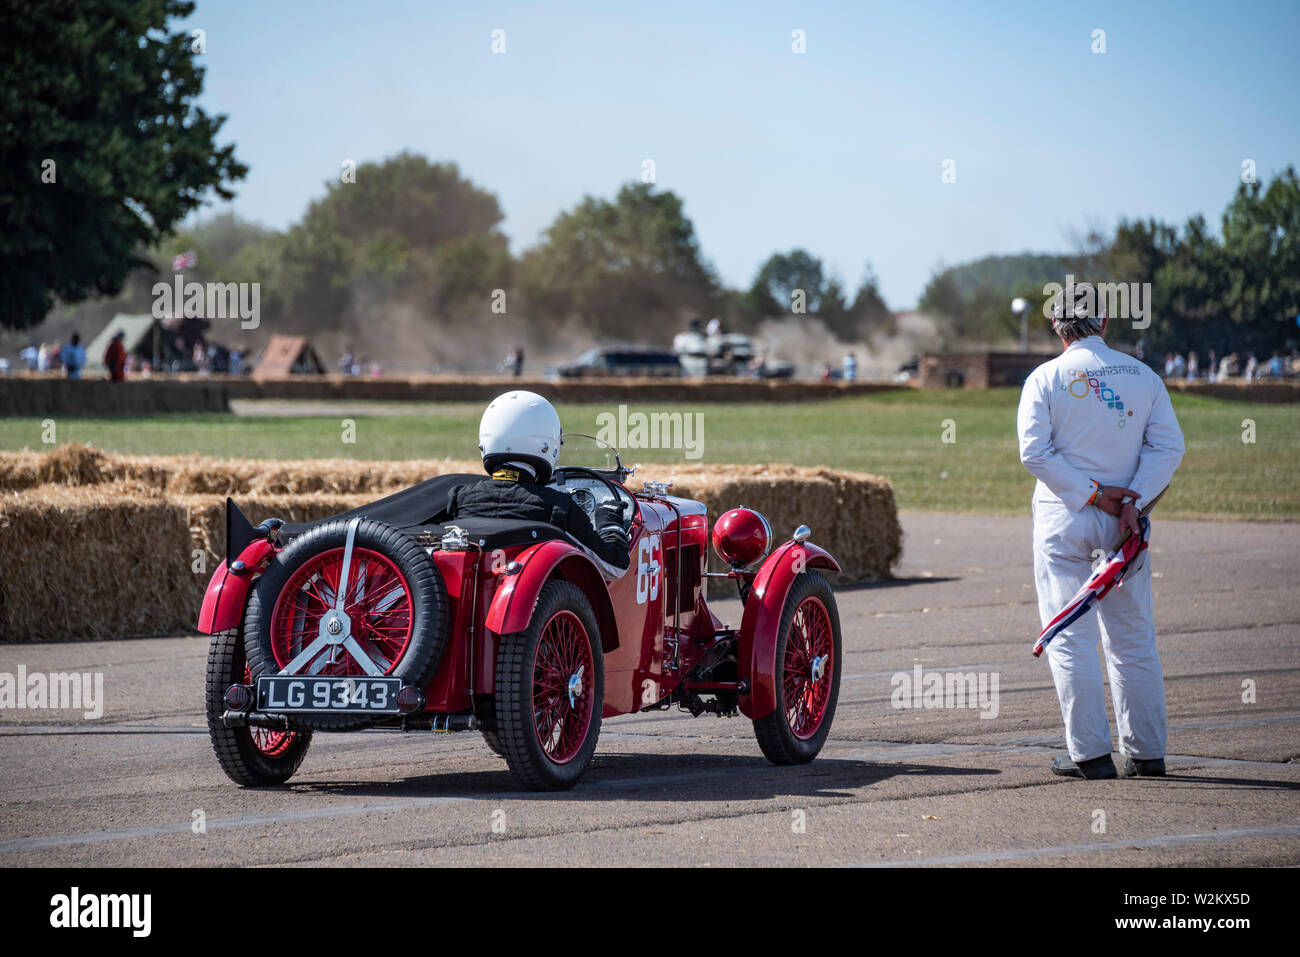 1932 MG J2 Supercharger racing car waits to start an exhibition lap at the 2018 Flywheel Festival, Bicester Heritage Stock Photo